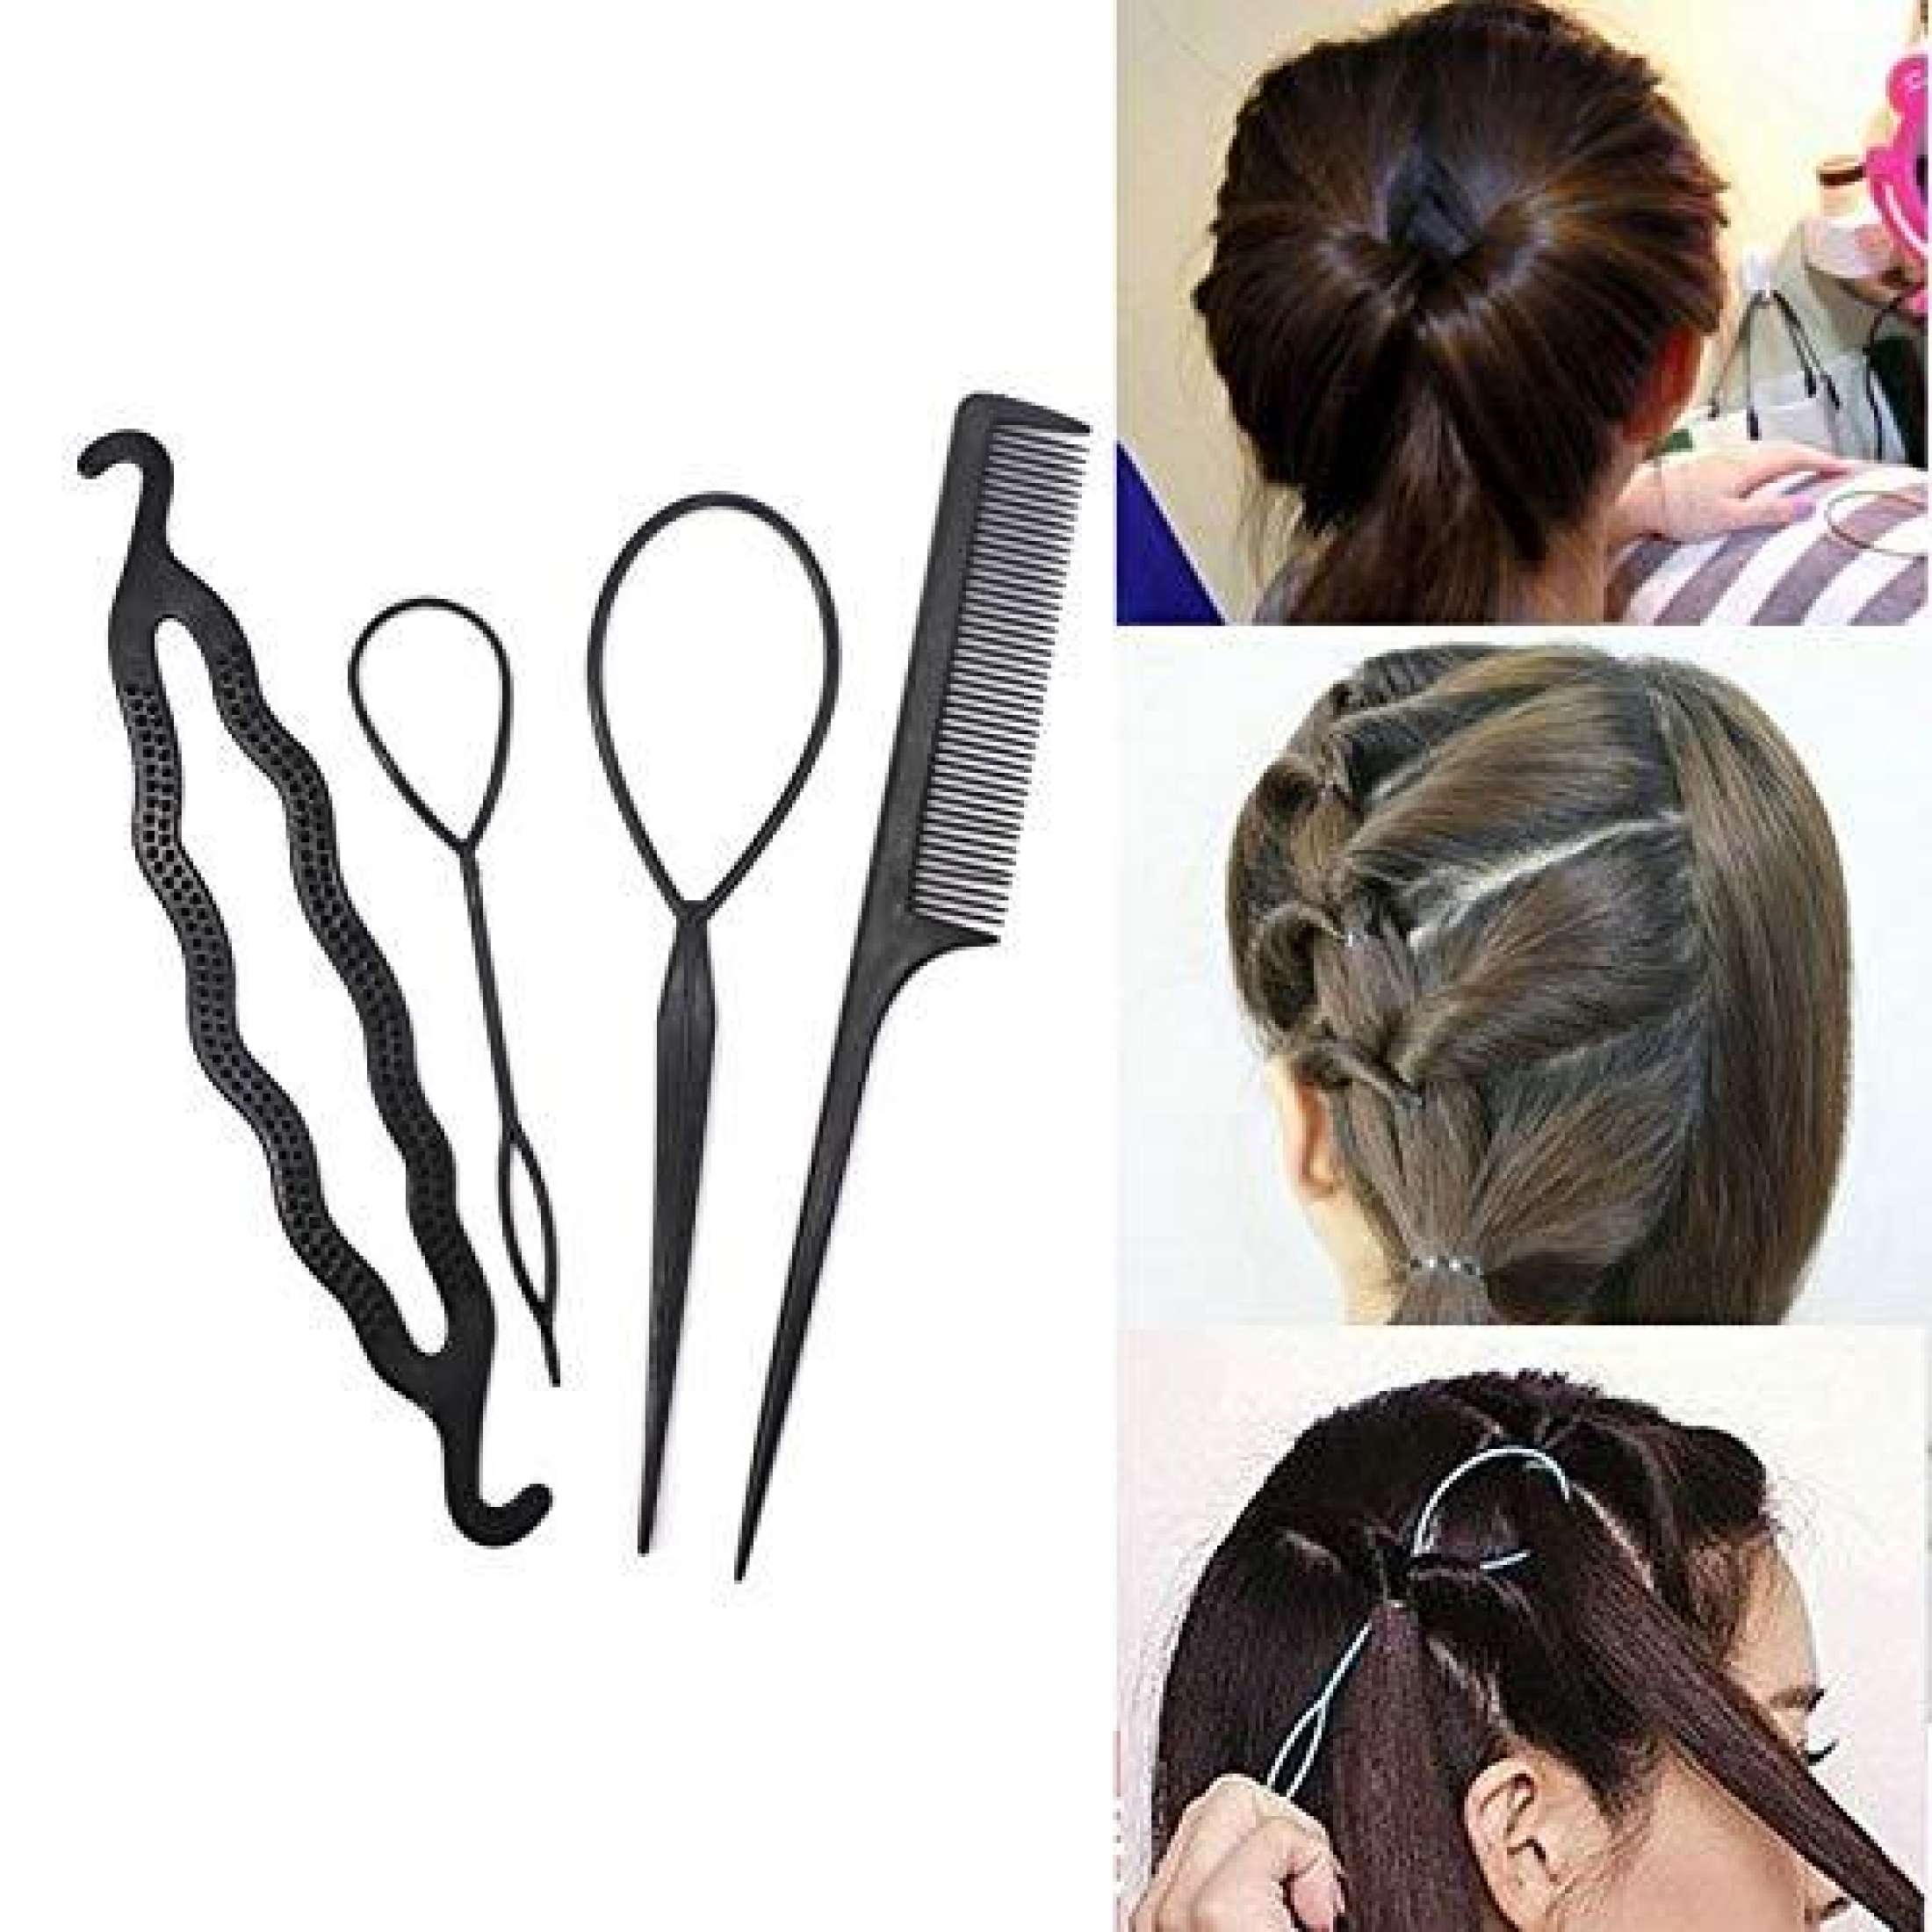 4Pcs/Set Women Girl's Magic Hair Twist Styling Tools - Online Home Shopping  in Pakistan | Best Deals - Fast Delivery